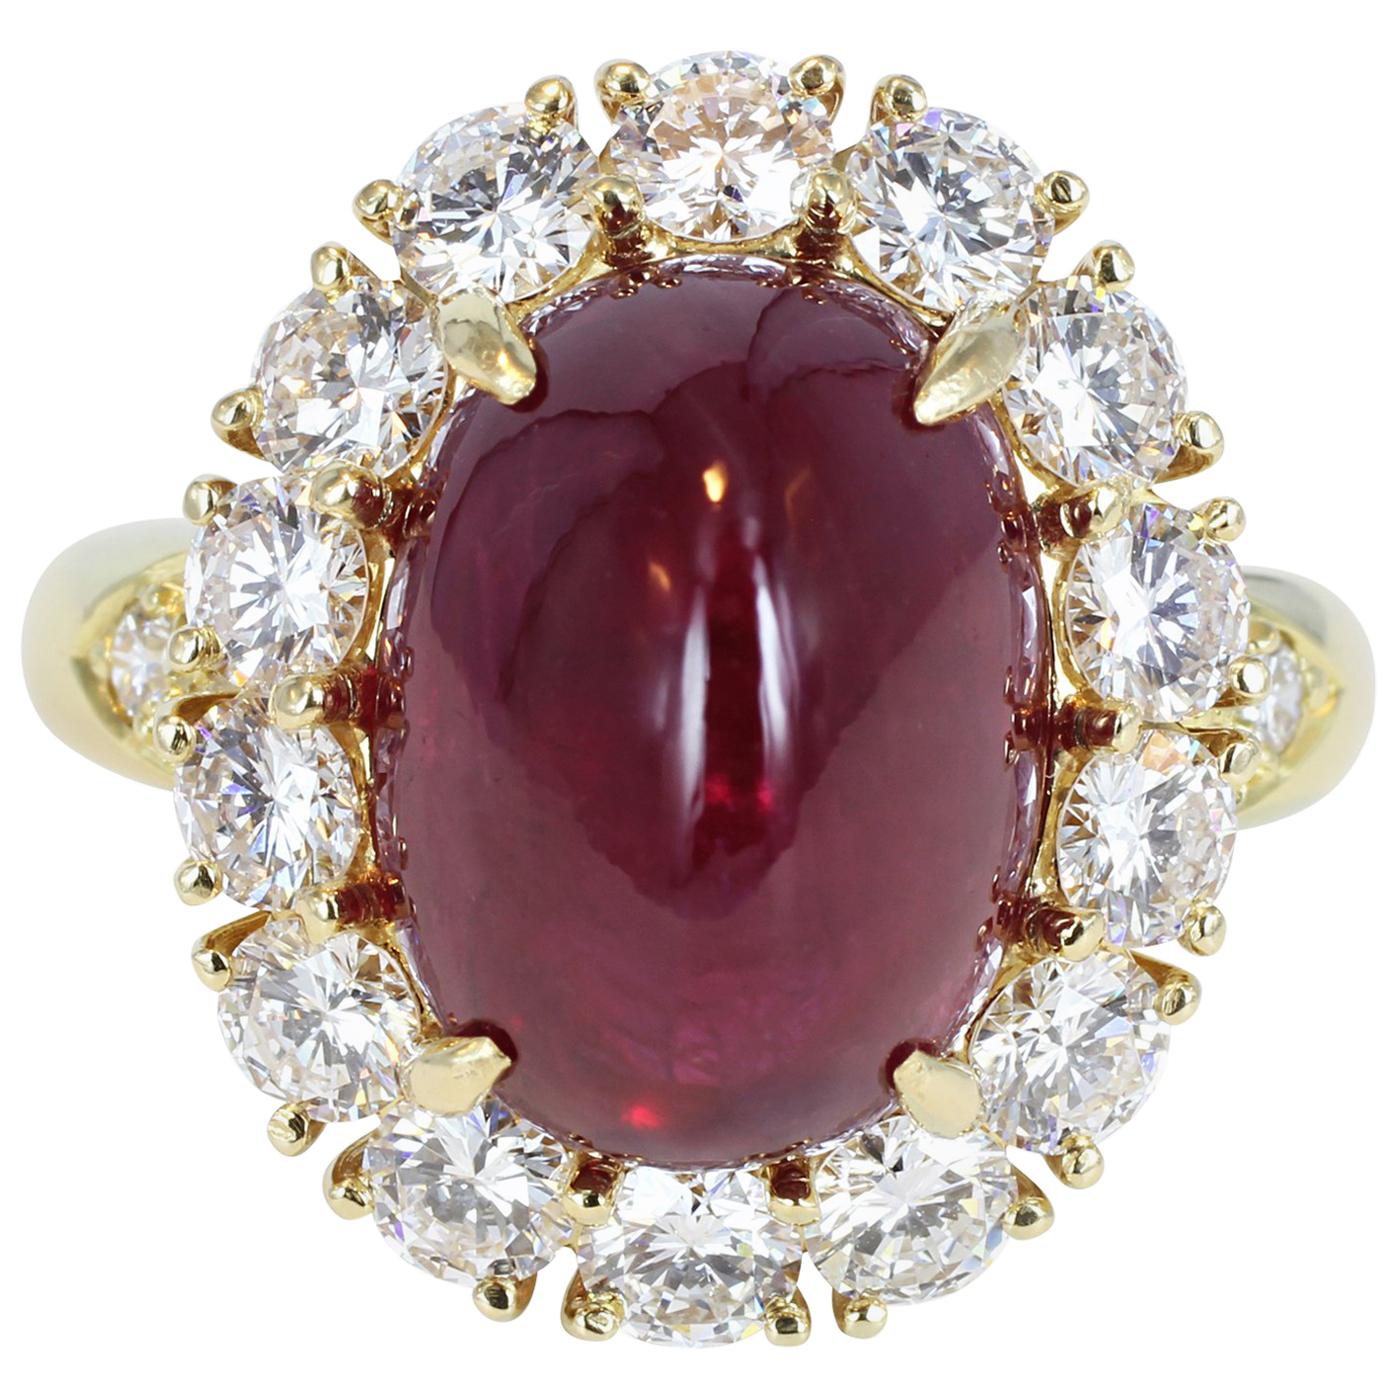  Van Cleef & Arpels 9.42 Carat Cabochon Ruby and Diamond Cluster Ring For Sale